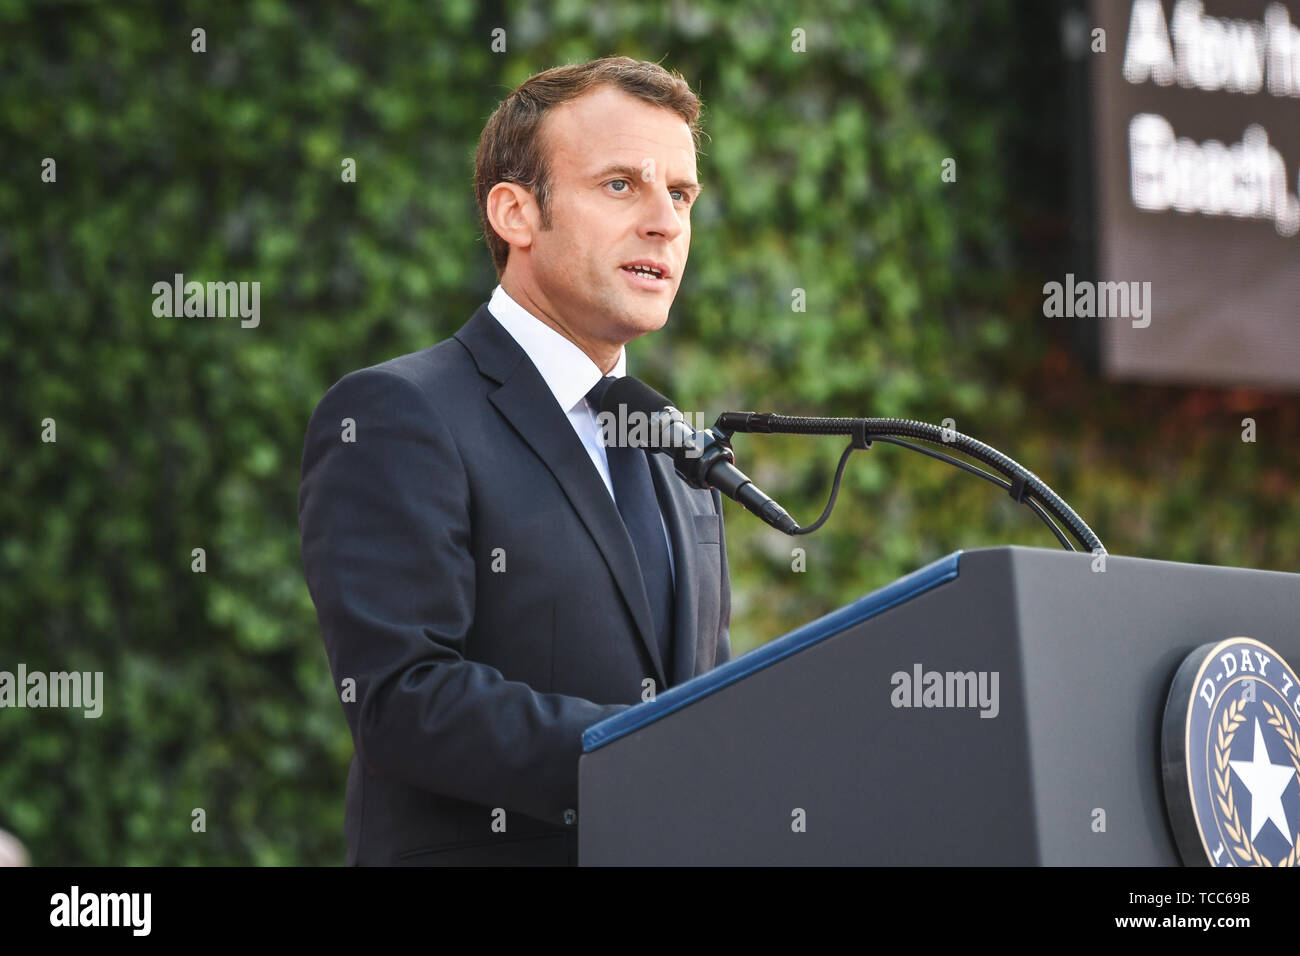 Colleville Sur Mer, France. 06th June, 2019. French President Emmanuel Macron addresses a commemoration ceremony marking the 75th D-Day Anniversary at the Normandy American Cemetery and Memorial June 6, 2019 in Colleville-sur-Mer, France. Thousands have converged on Normandy to commemorate the 75th anniversary of Operation Overlord, the WWII Allied invasion commonly known as D-Day. Credit: Planetpix/Alamy Live News Stock Photo